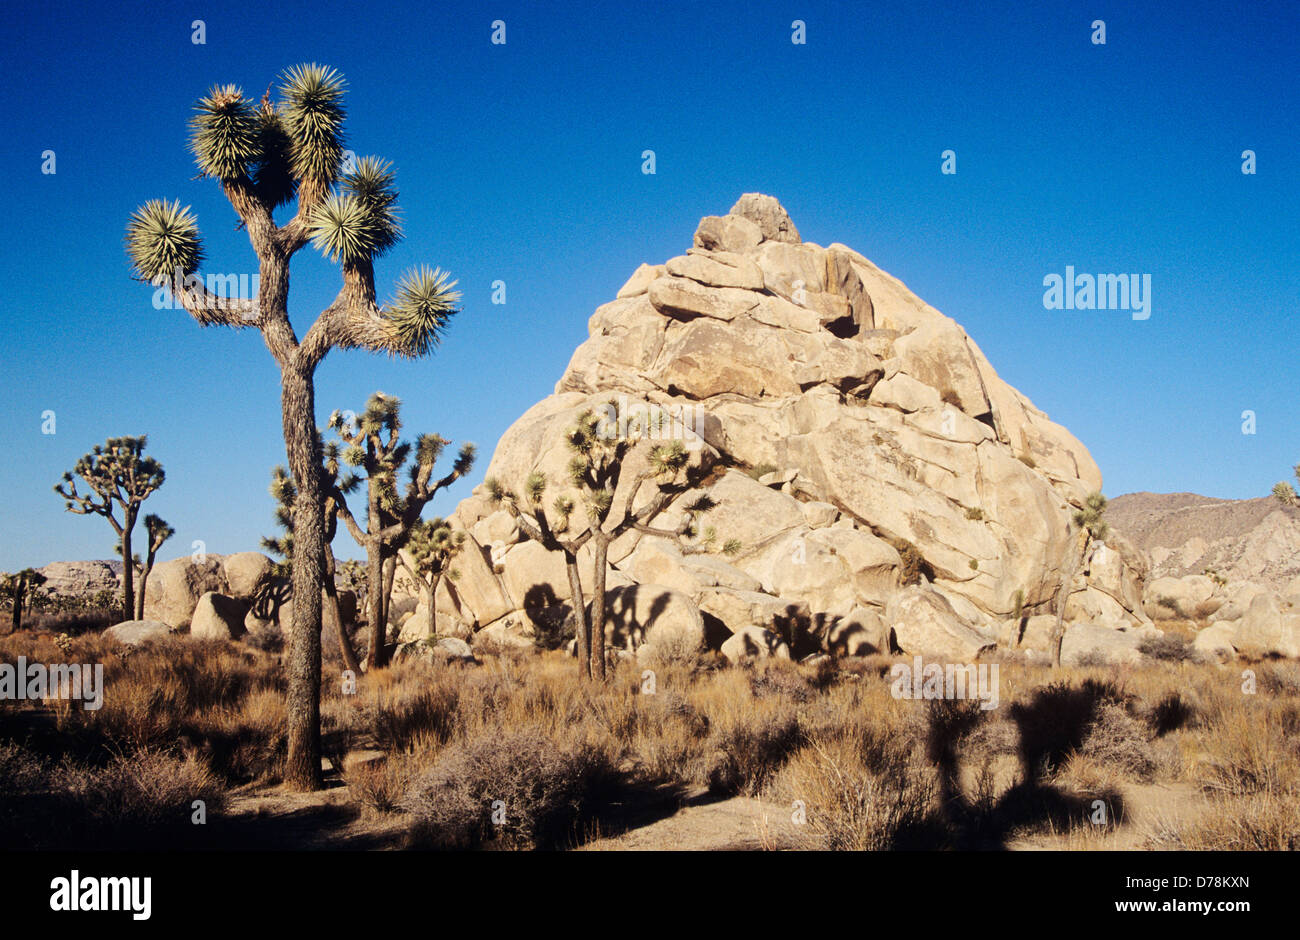 USA California Joshua Tree National Park  Joshua trees Yucca brevifolia in barren landscape with domed rock formation behind. Stock Photo